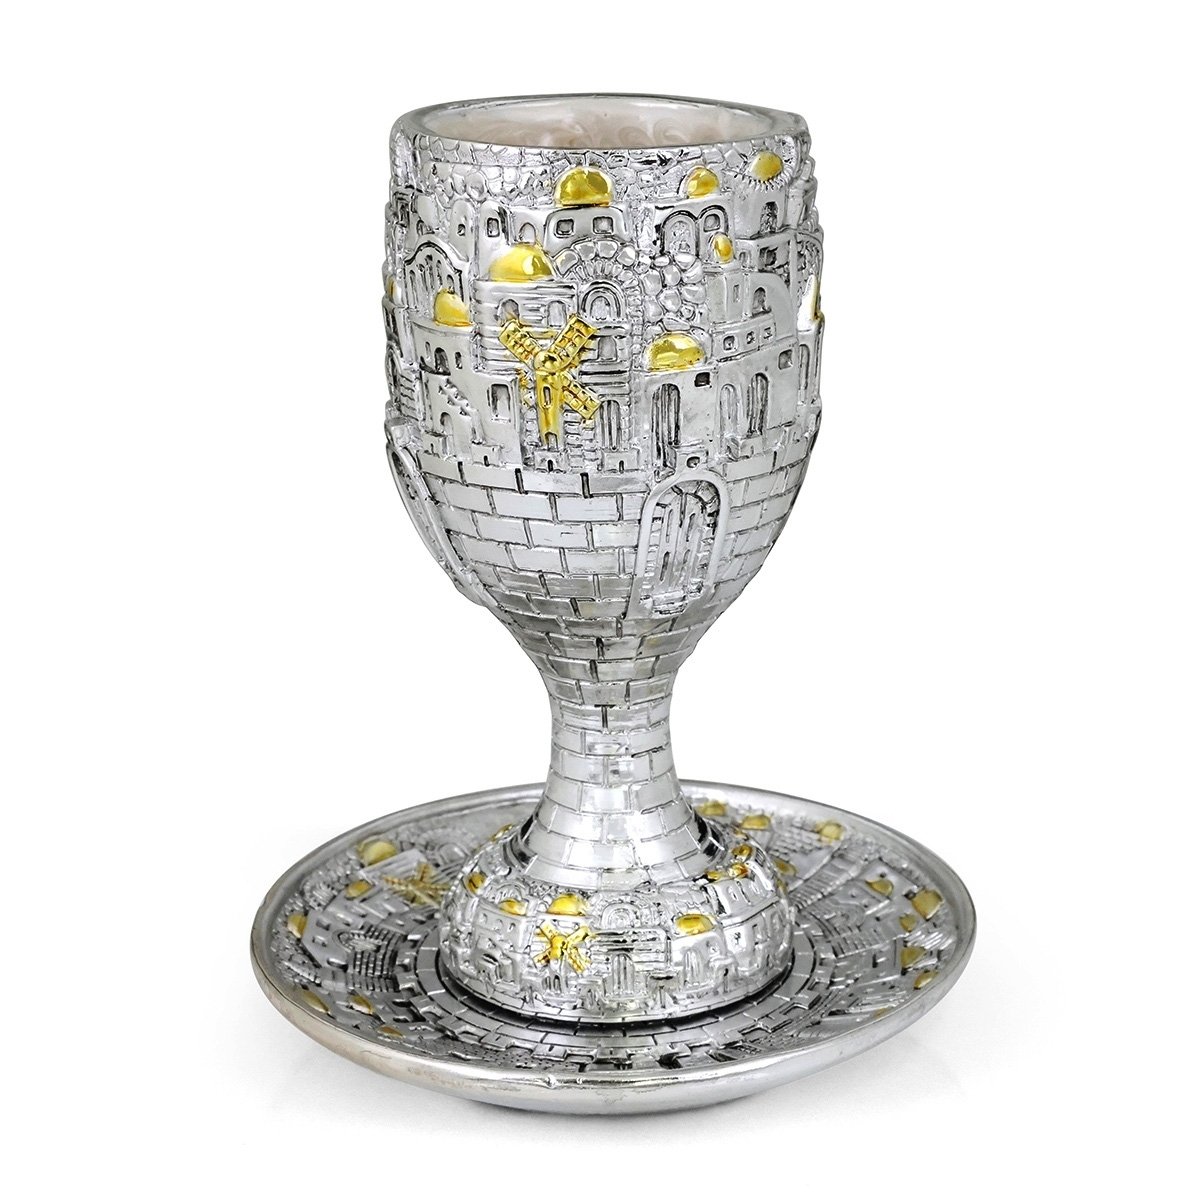 Sanctify In Style With These Top 10 Kiddush Cups